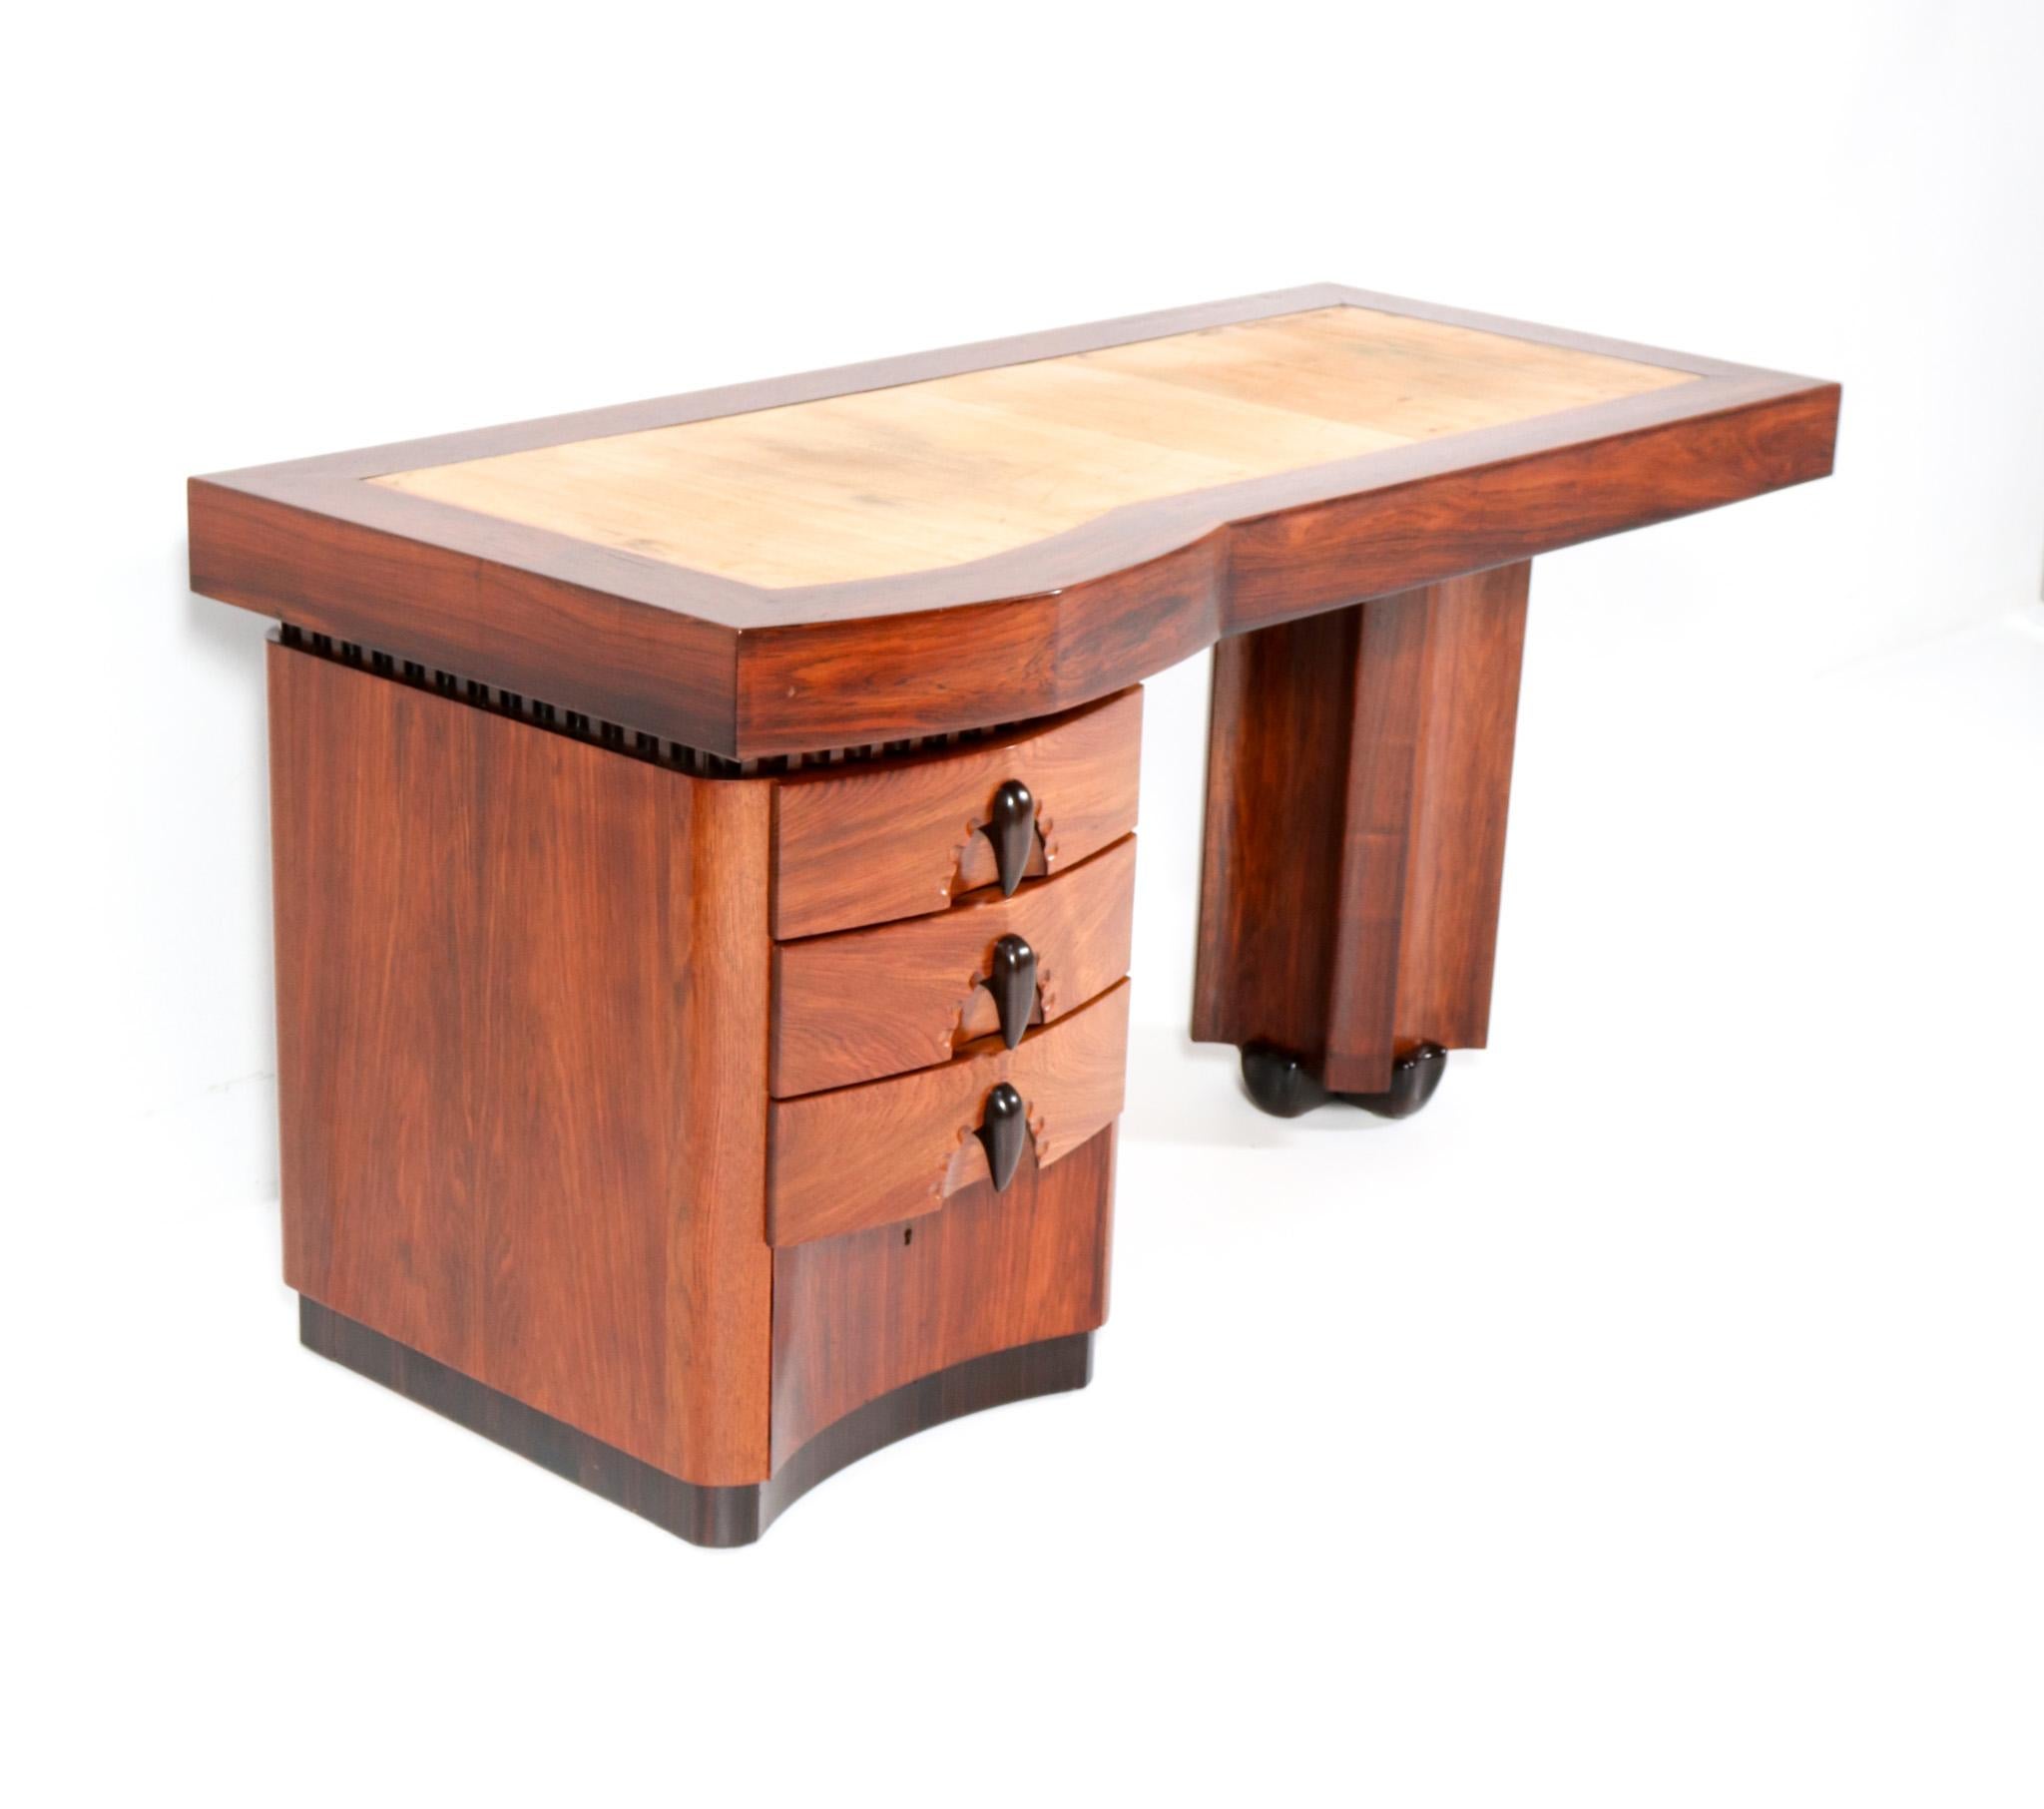 Magnificent and ultra rare Art Deco Amsterdamse School desk or writing table.
Design by F.A. Warners.
Striking Dutch design from the 1920s.
Solid padouk  and original padouk veneer base on stylish solid macassar ebony feet.
Four original drawers